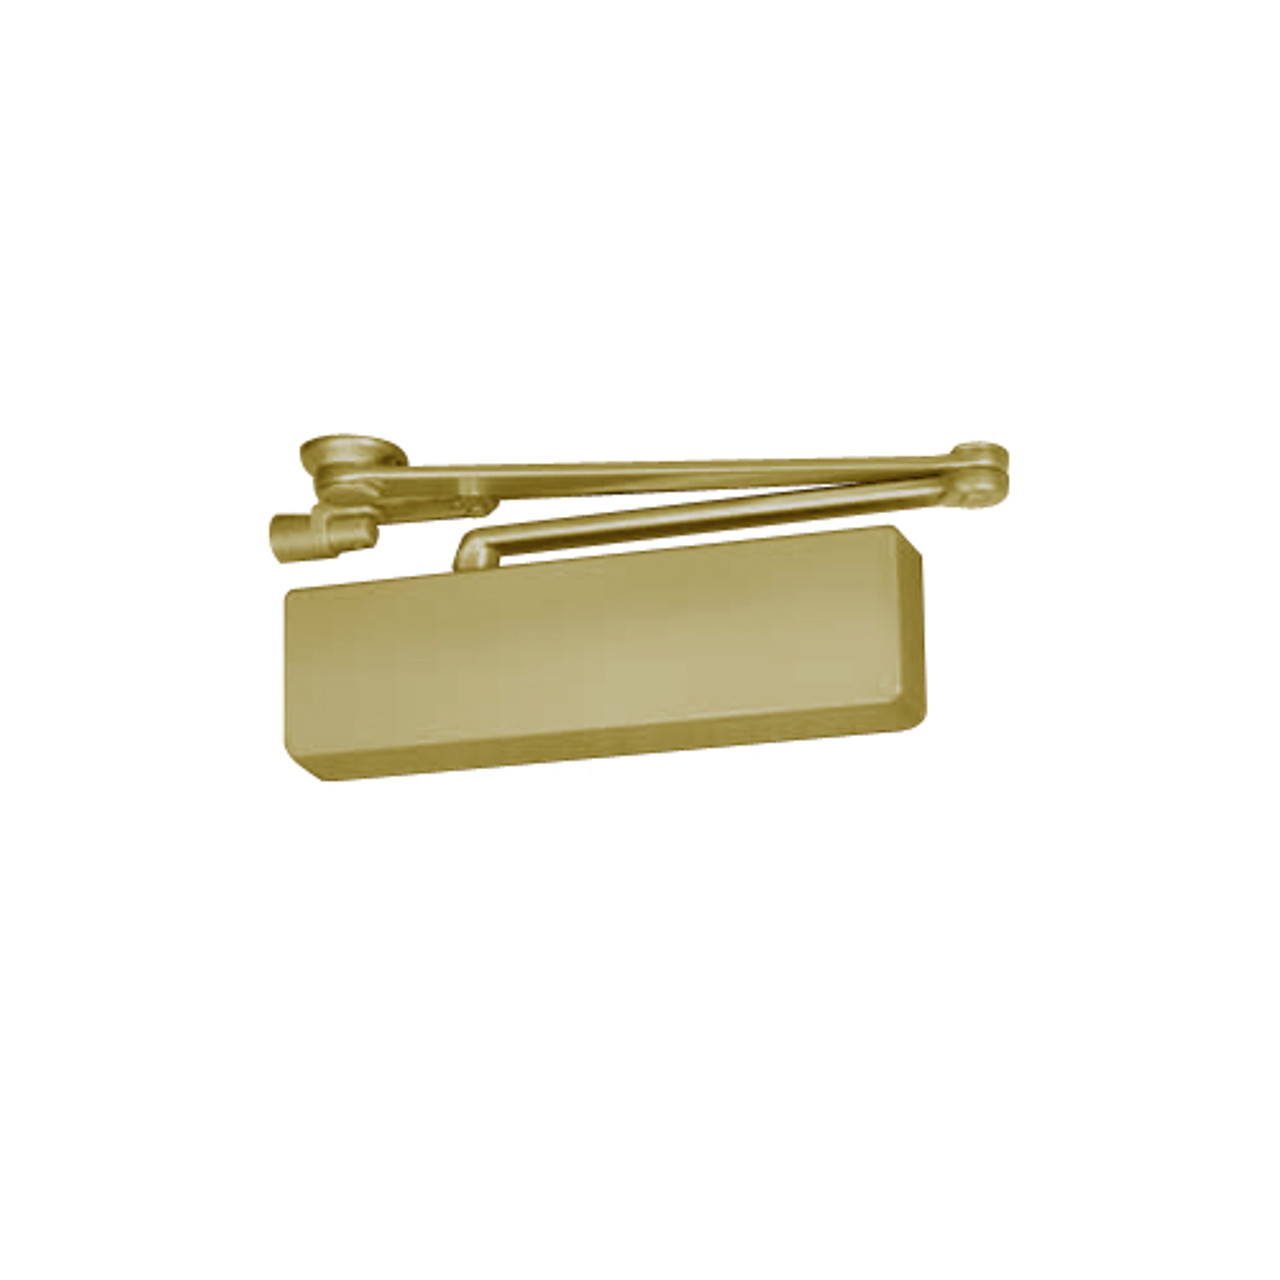 CPS7500M-696 Norton 7500 Series Non-Hold Open Institutional Door Closer with CloserPlus Spring Arm in Gold Finish